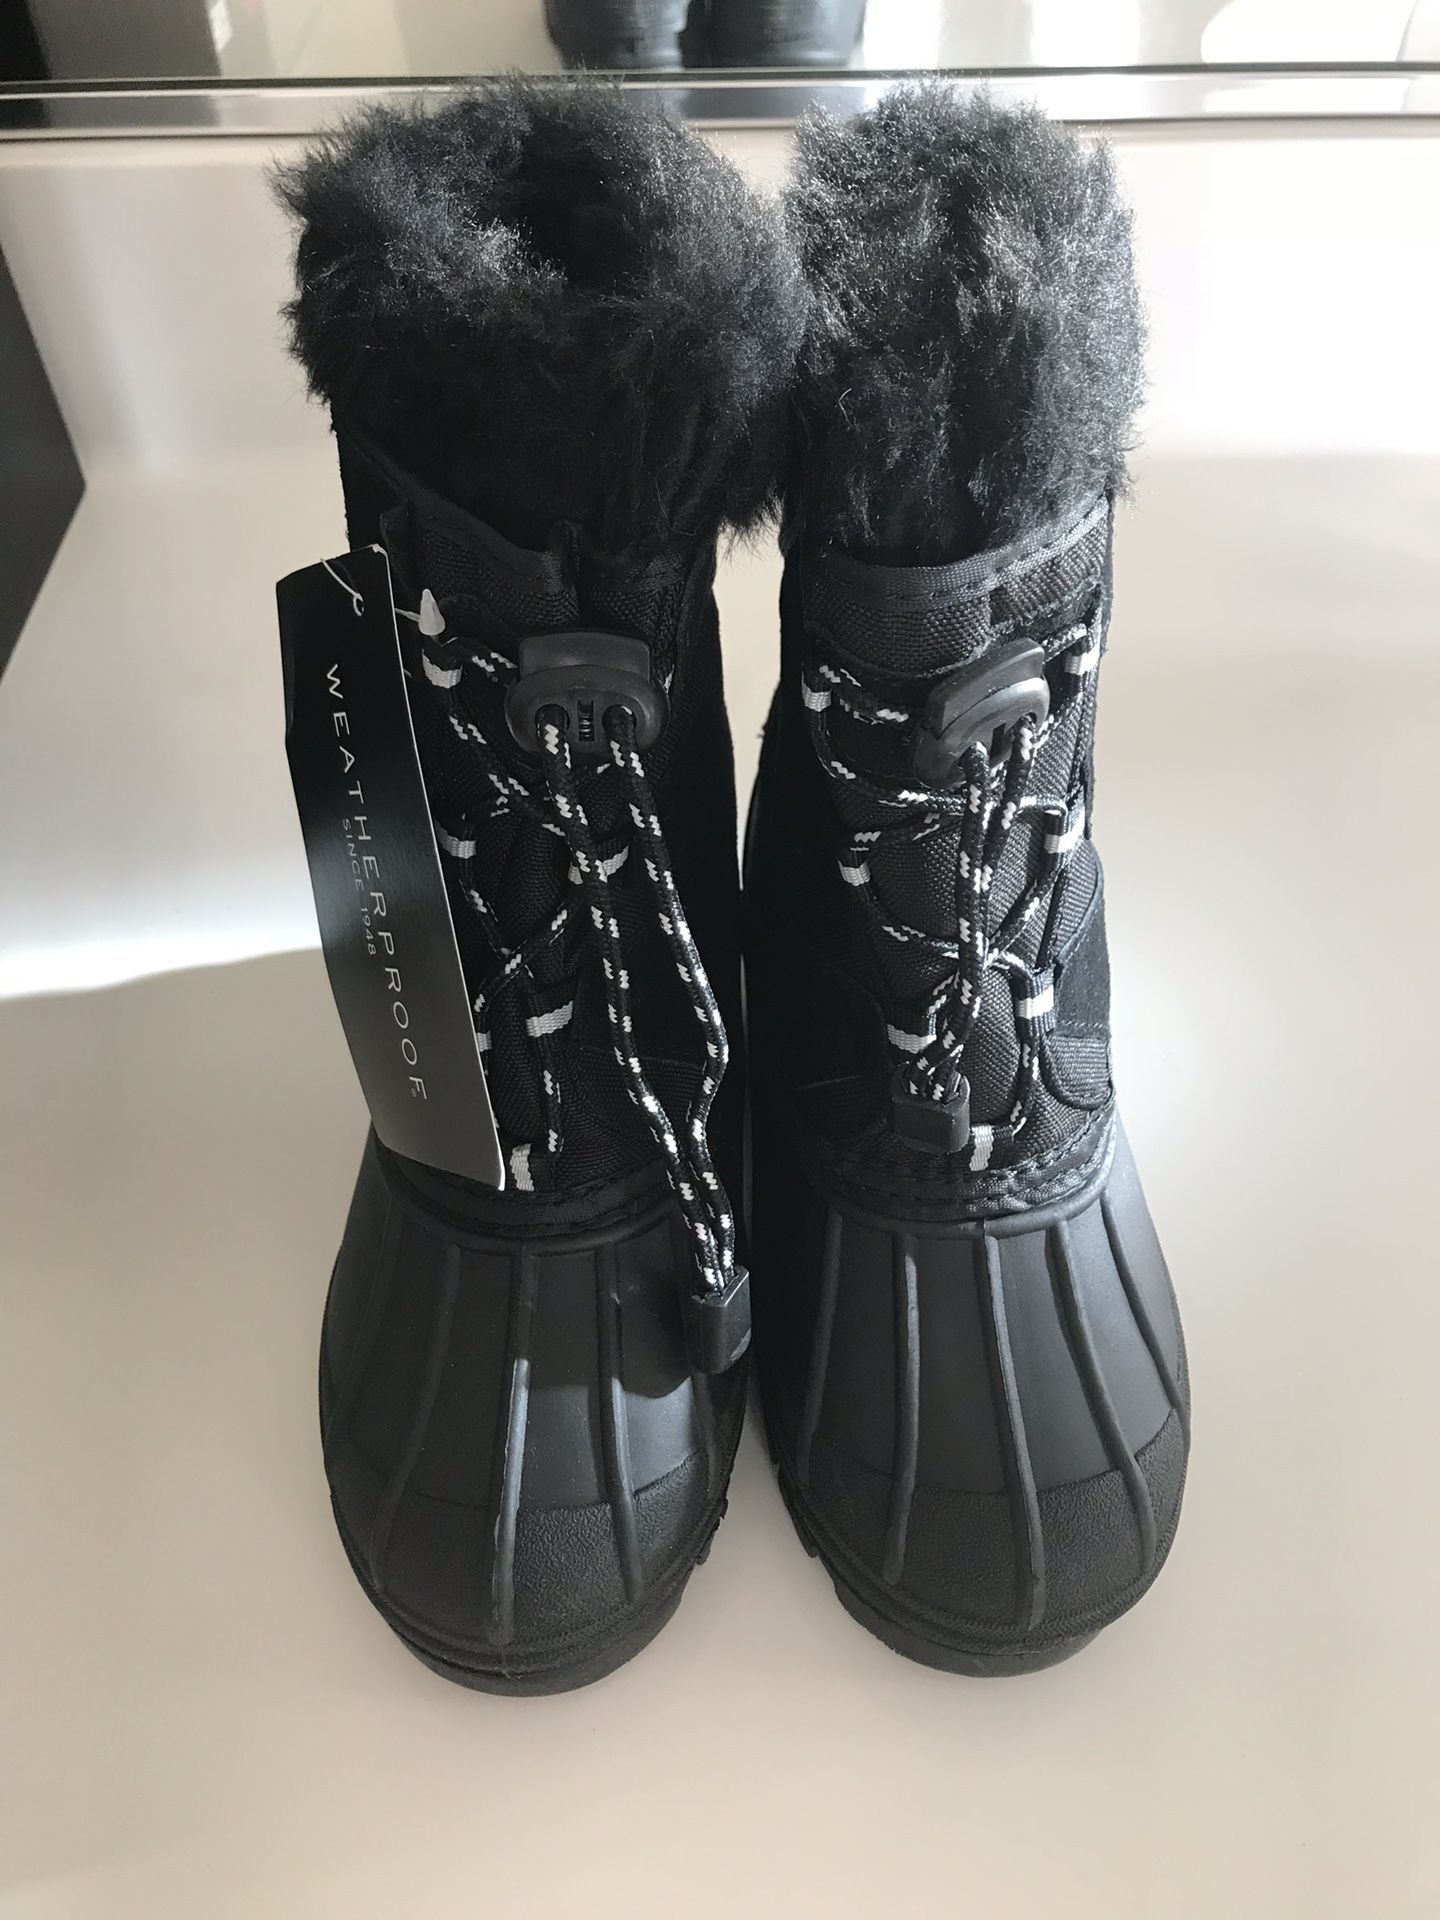 ***BRAND NEW Kids Weatherproof boots size 10 only $20***